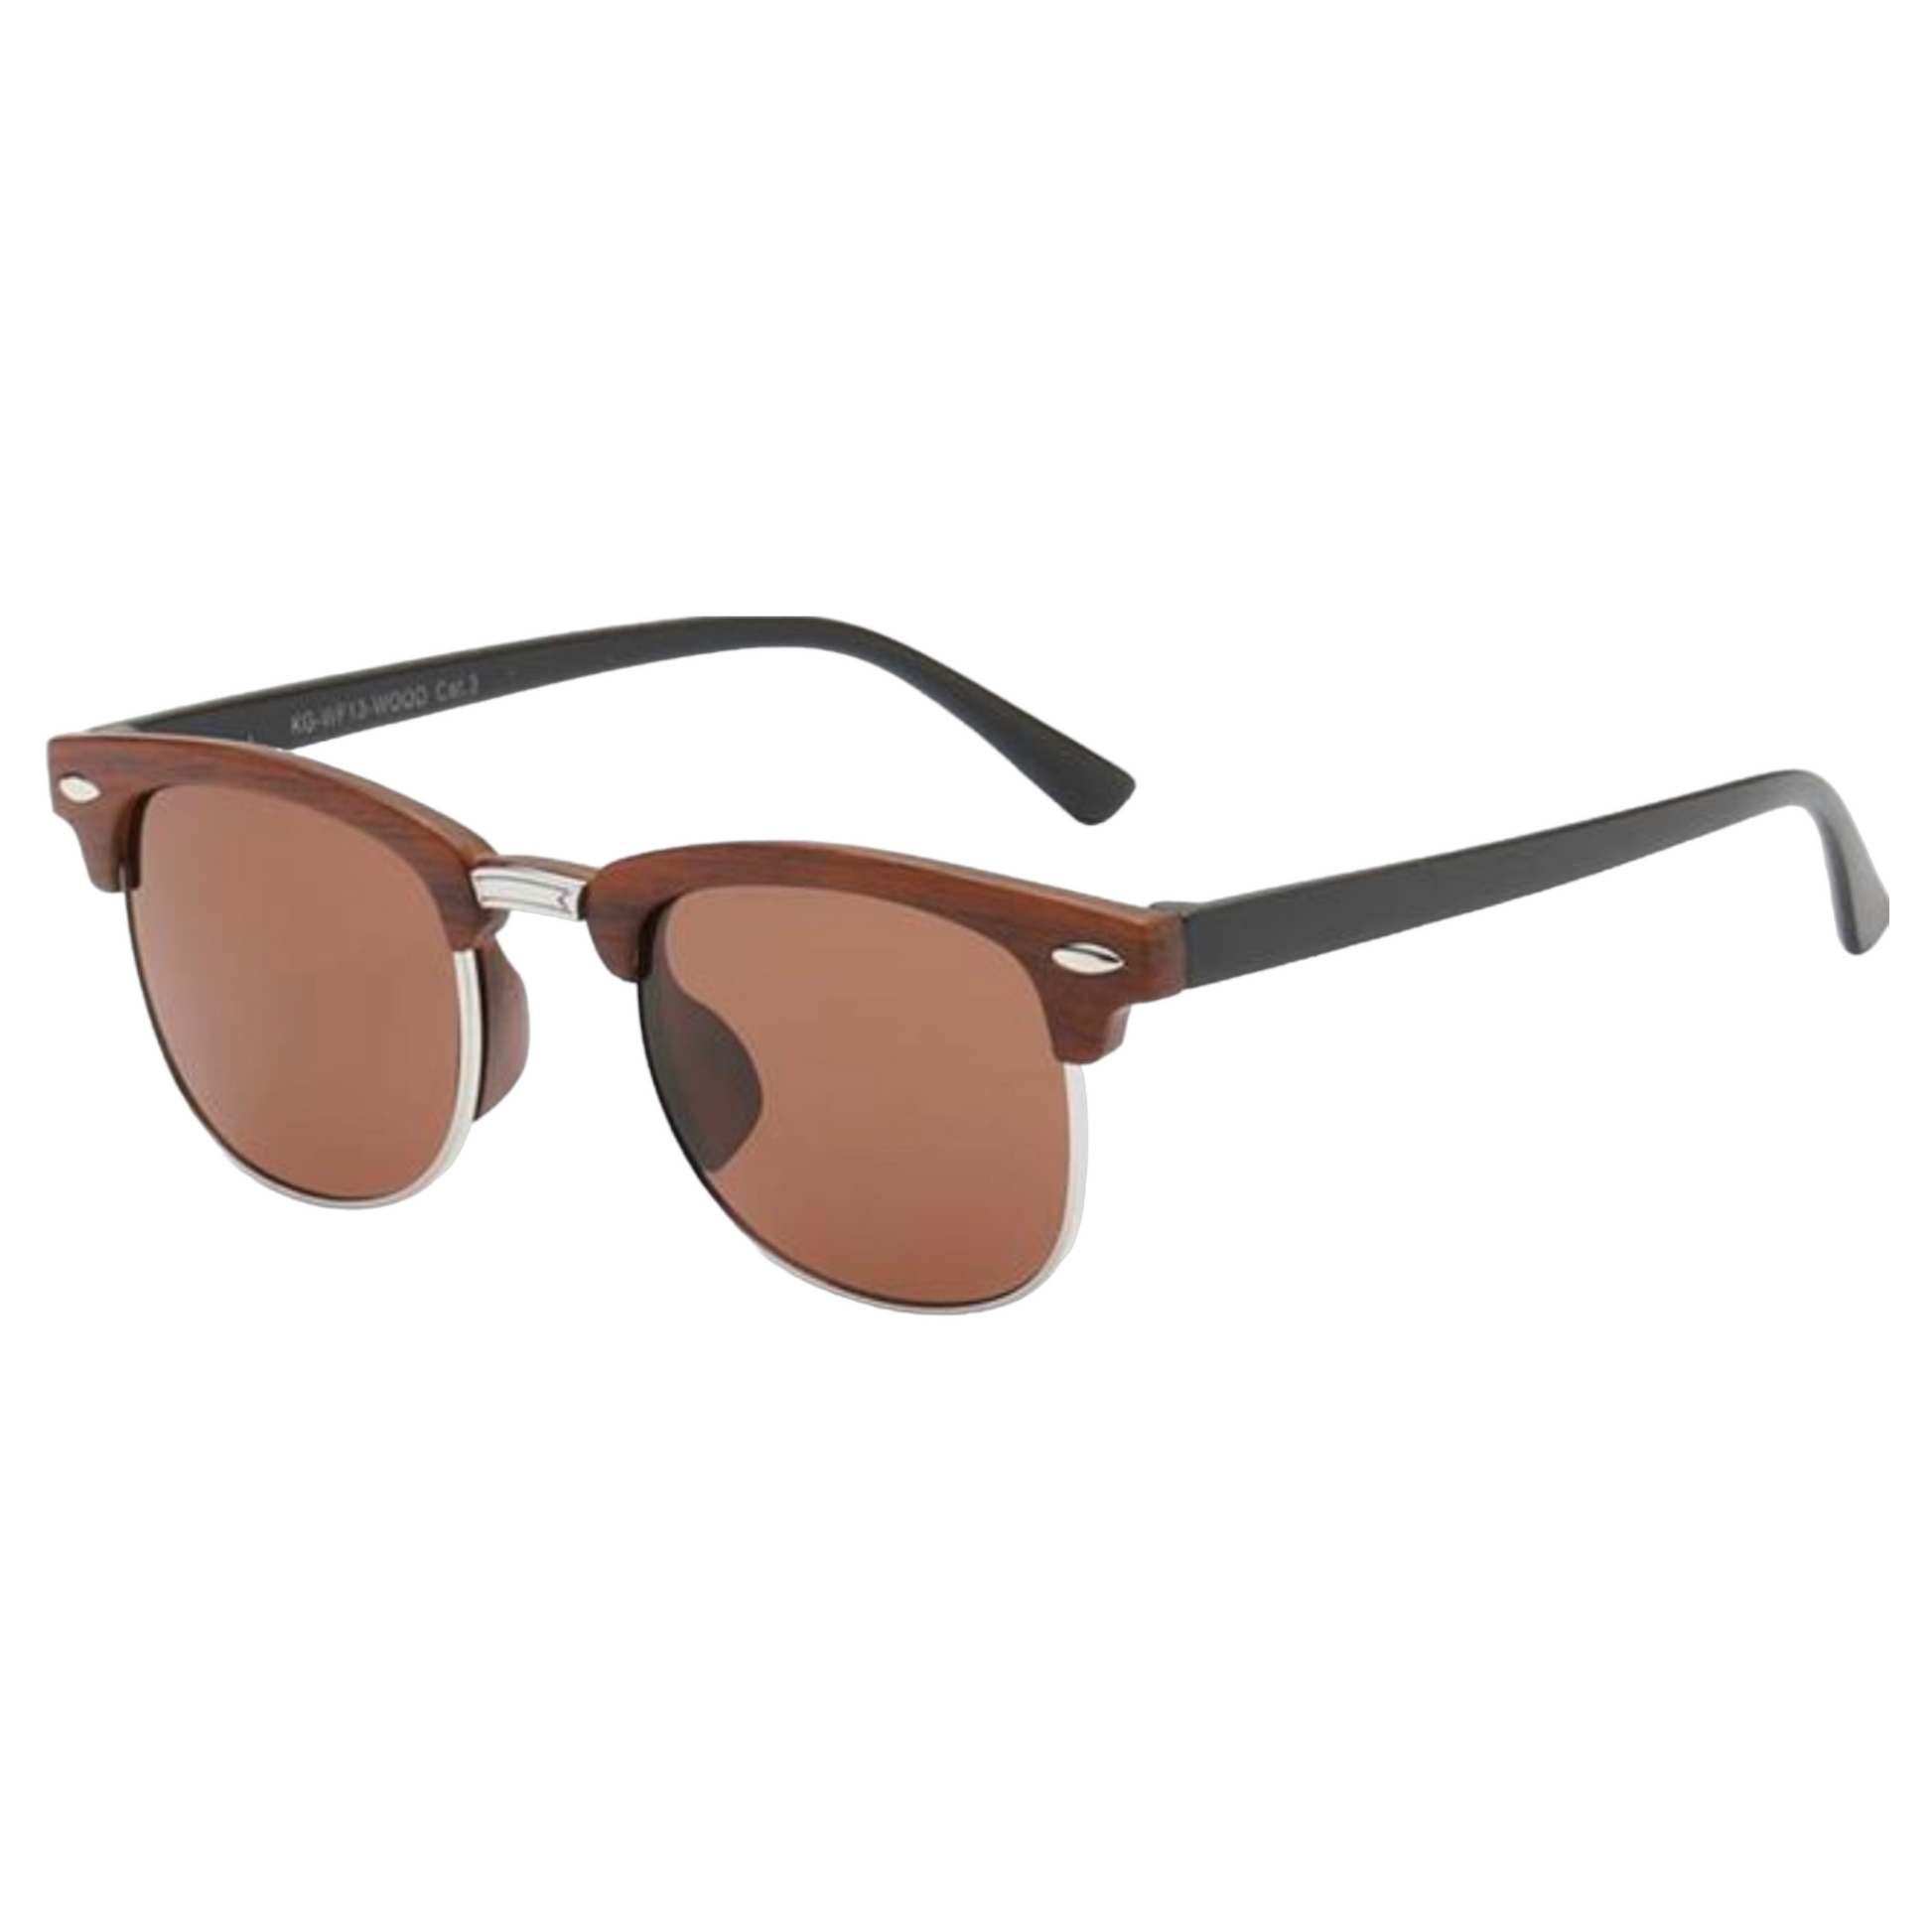 Children's Unisex Wood Look Half Rim Classic Sunglasses for Boy's and Girl's Wooden Look Silver Black Brown Lens Unbranded image_f8aa9677-7ddb-48f3-a4fd-3ce44525e723